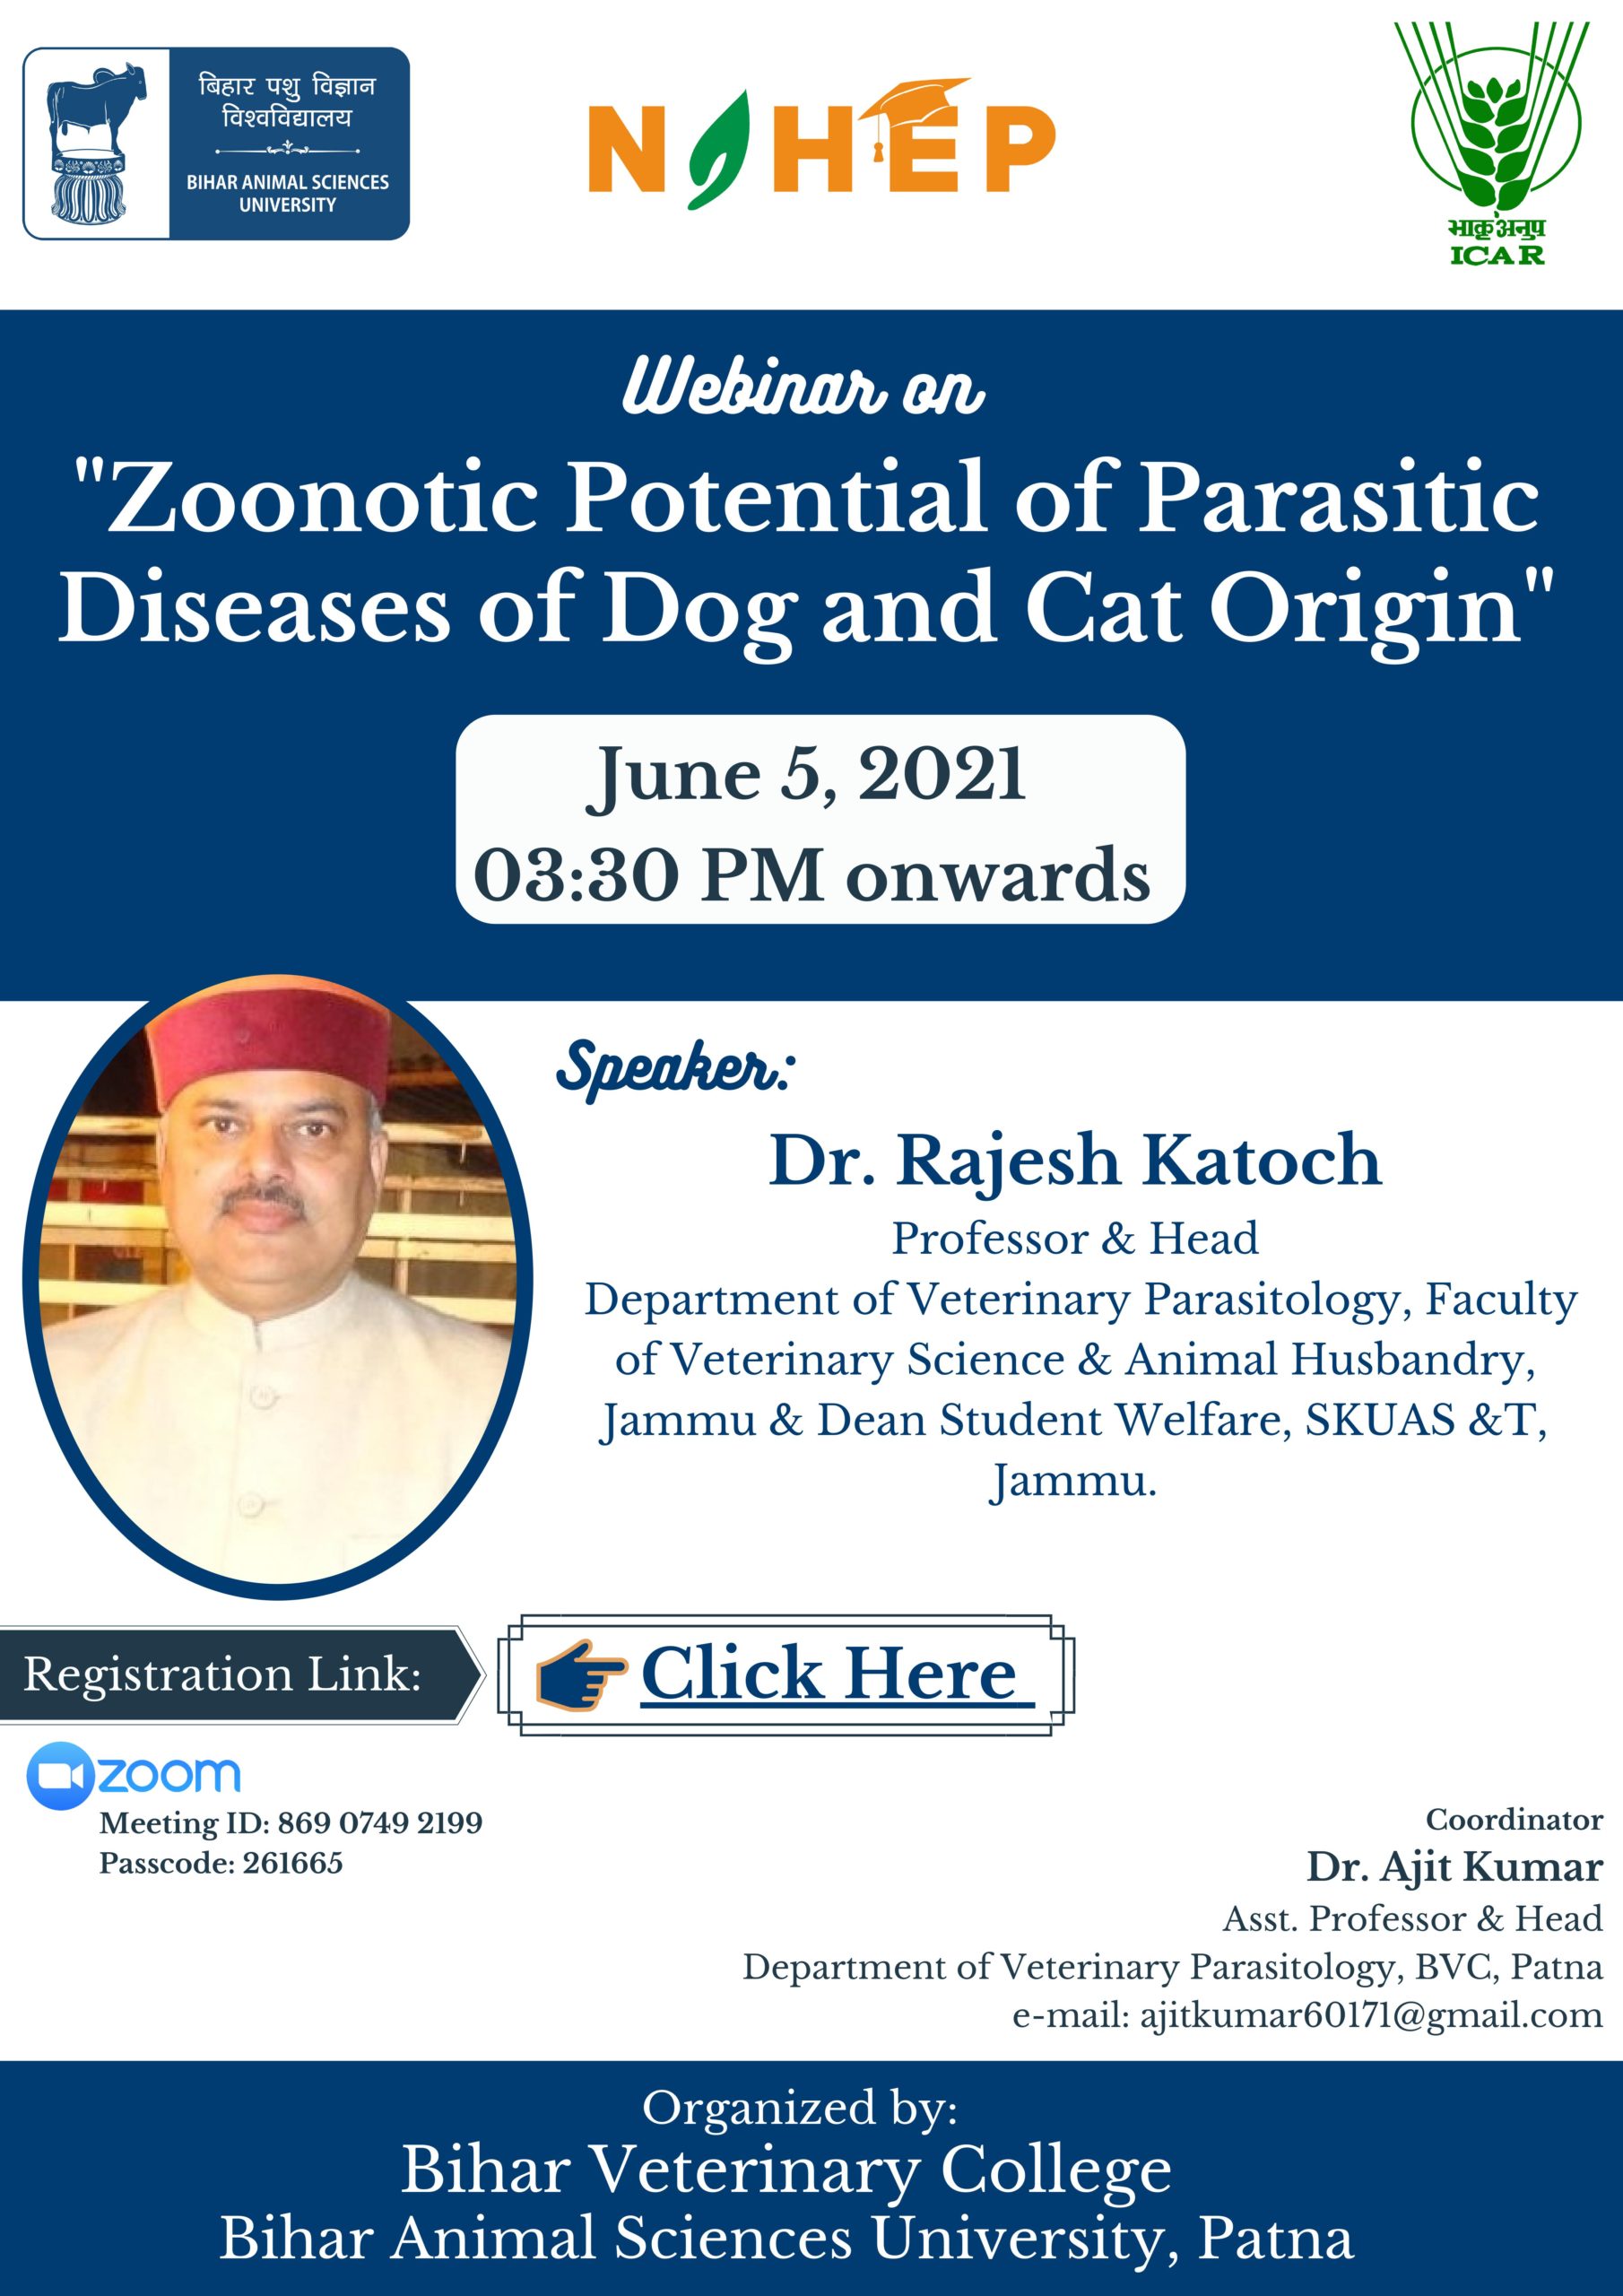 Webinar on Zoonotic Potential of Parasitic Diseases of Dog and Cat